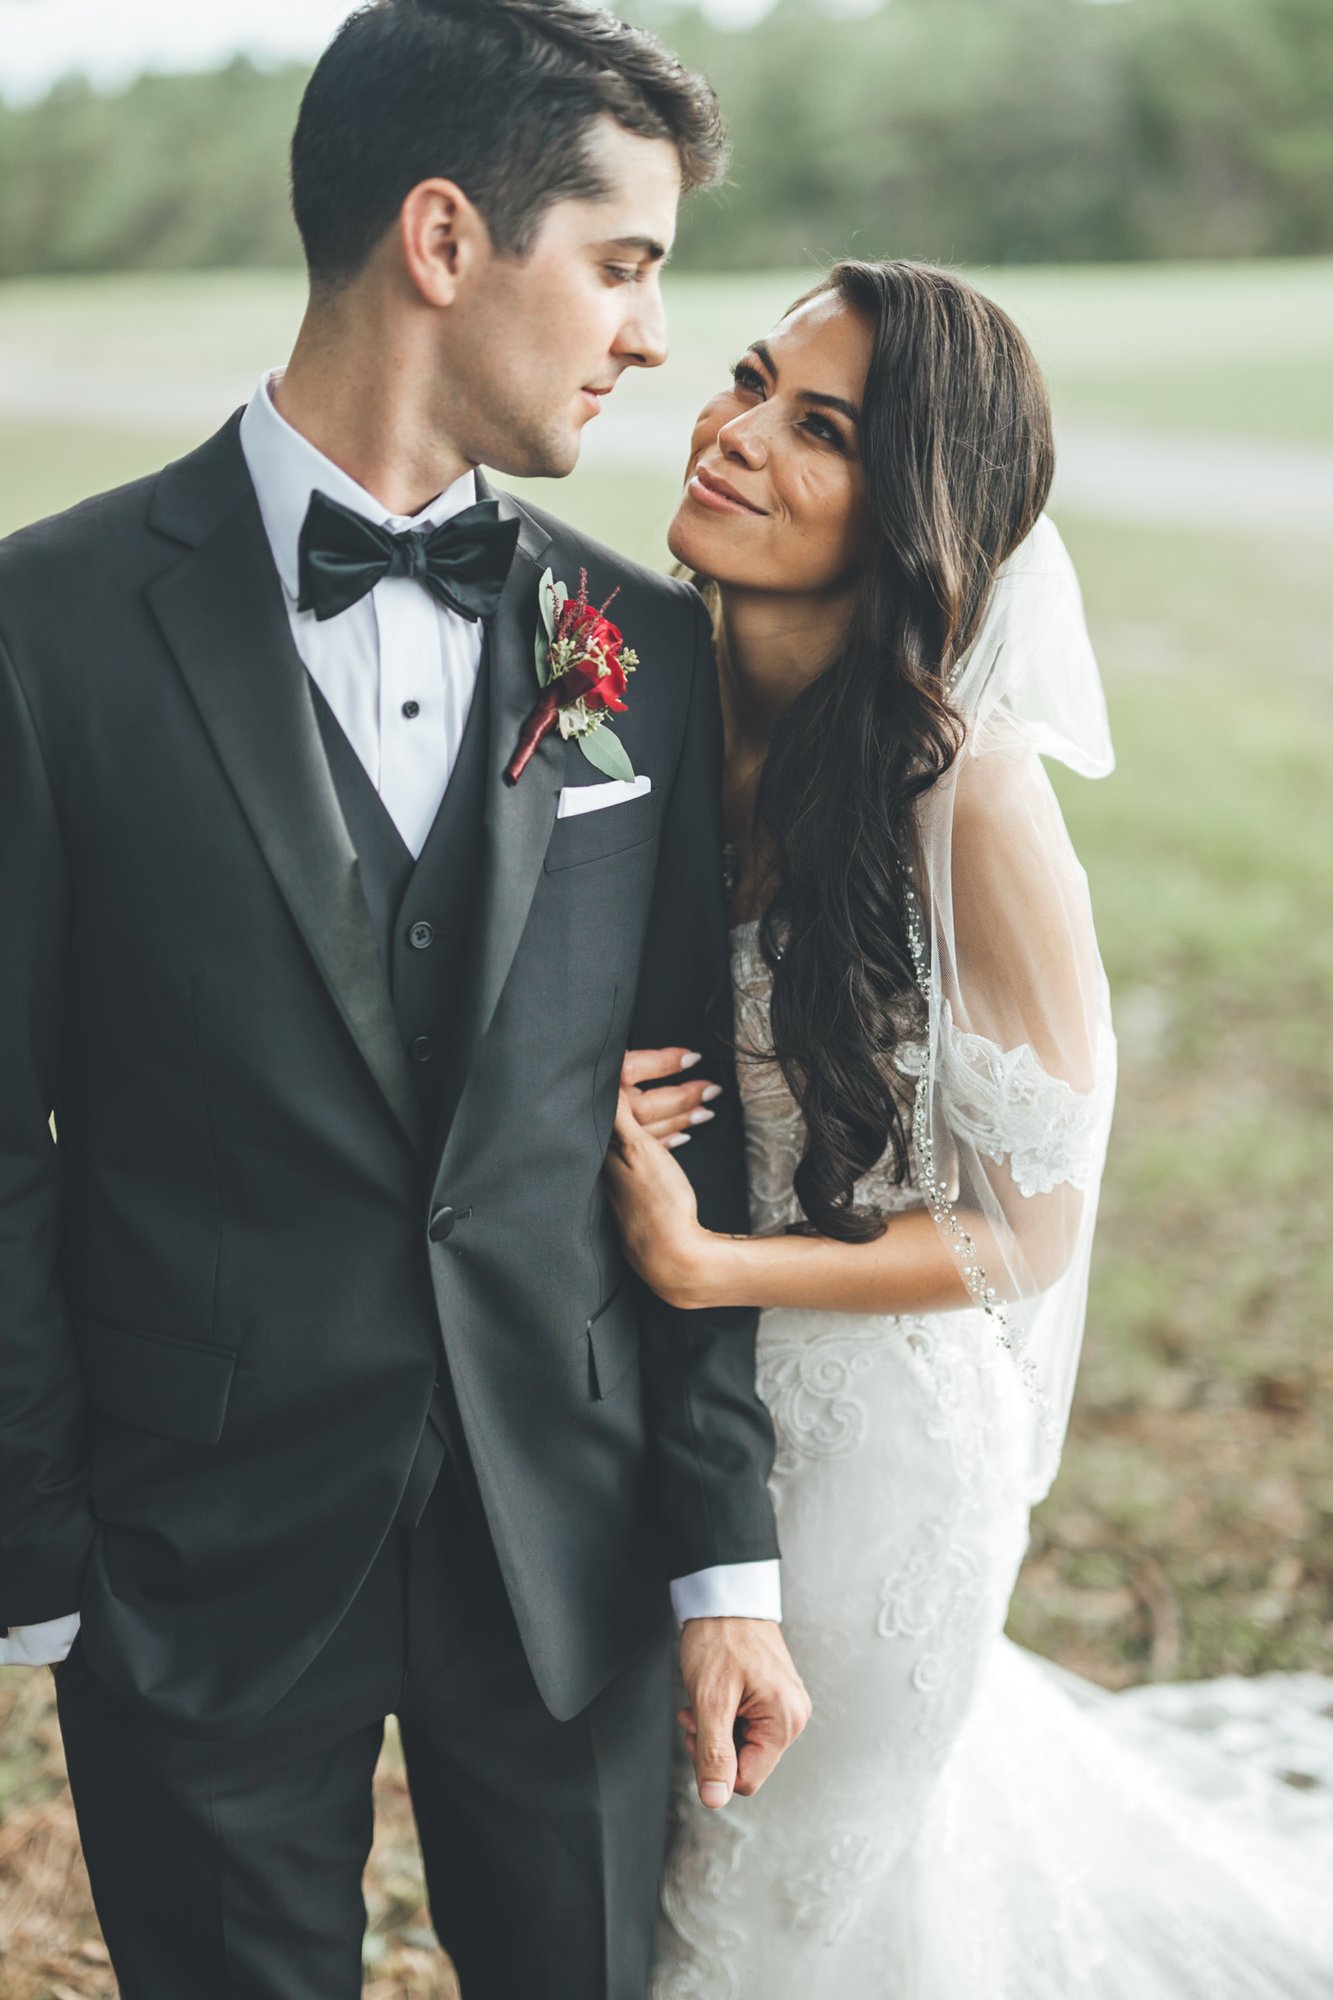 Bow Tie Photo & Video couple during bridal portraits after wedding ceremony but before wedding reception in St. Augustine, FL 2.jpg